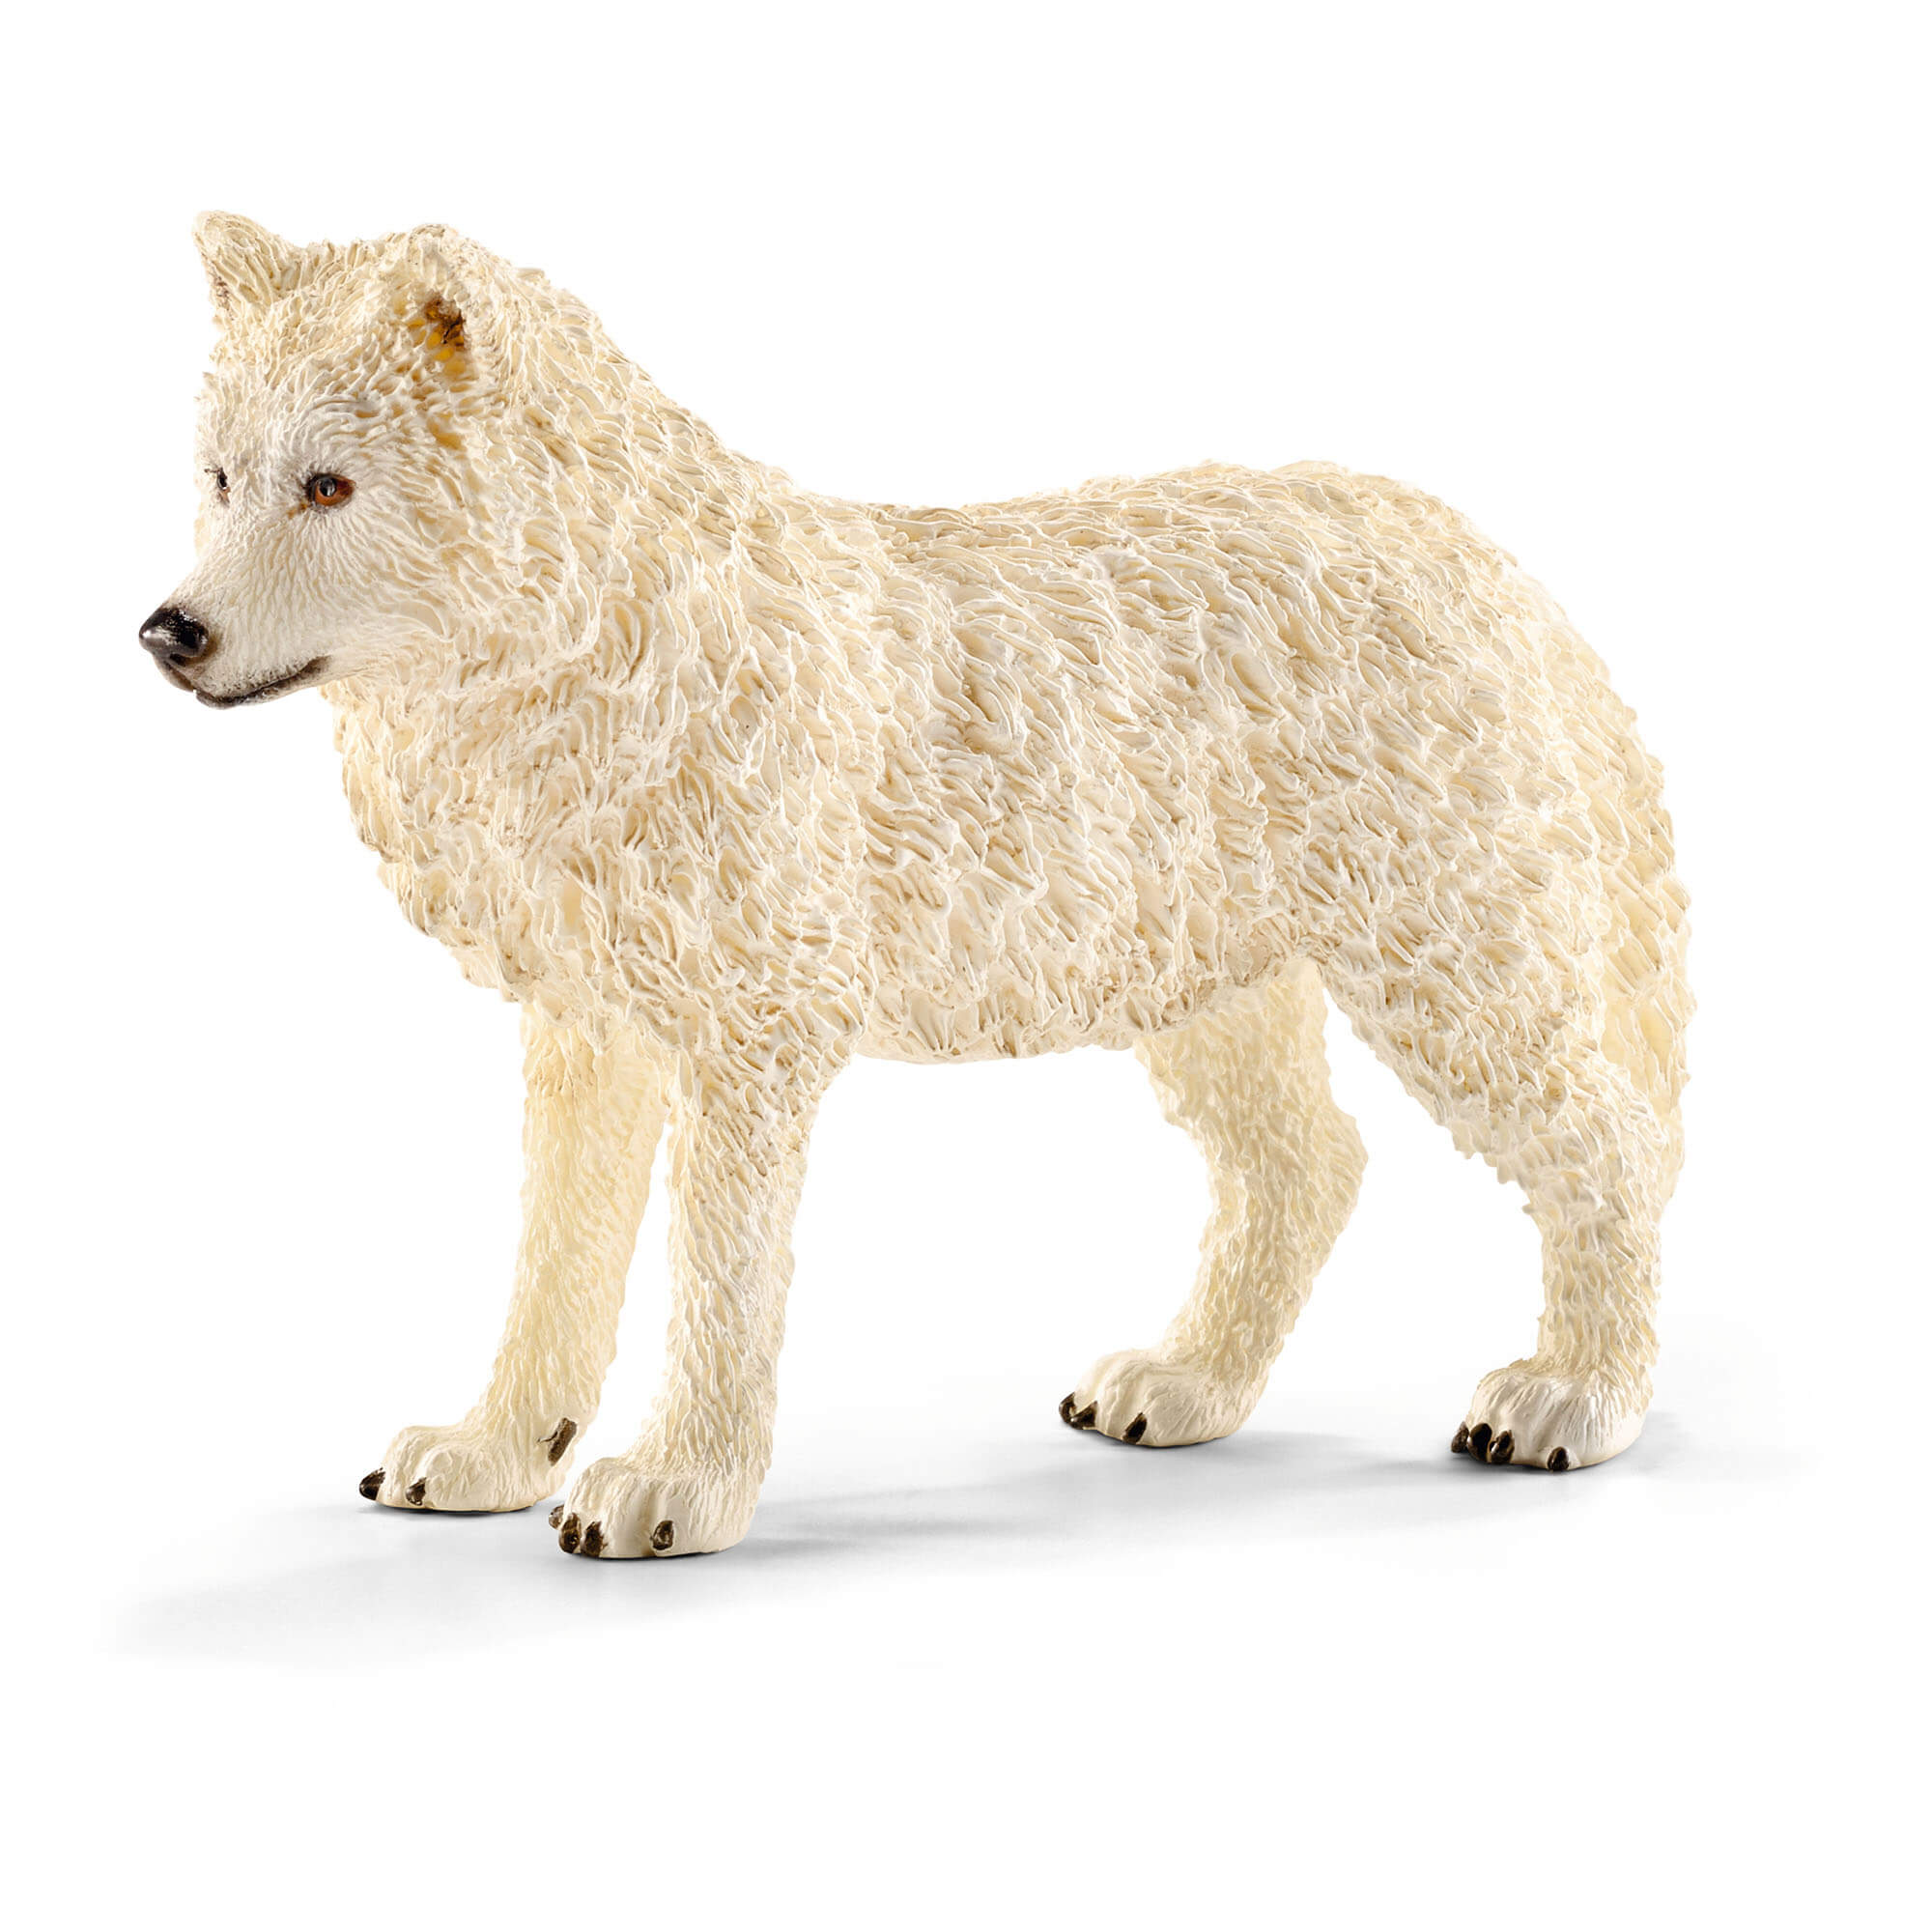 Schleich Artic Wolf Animal Figure. The Schleich white wolf is shown from the side.